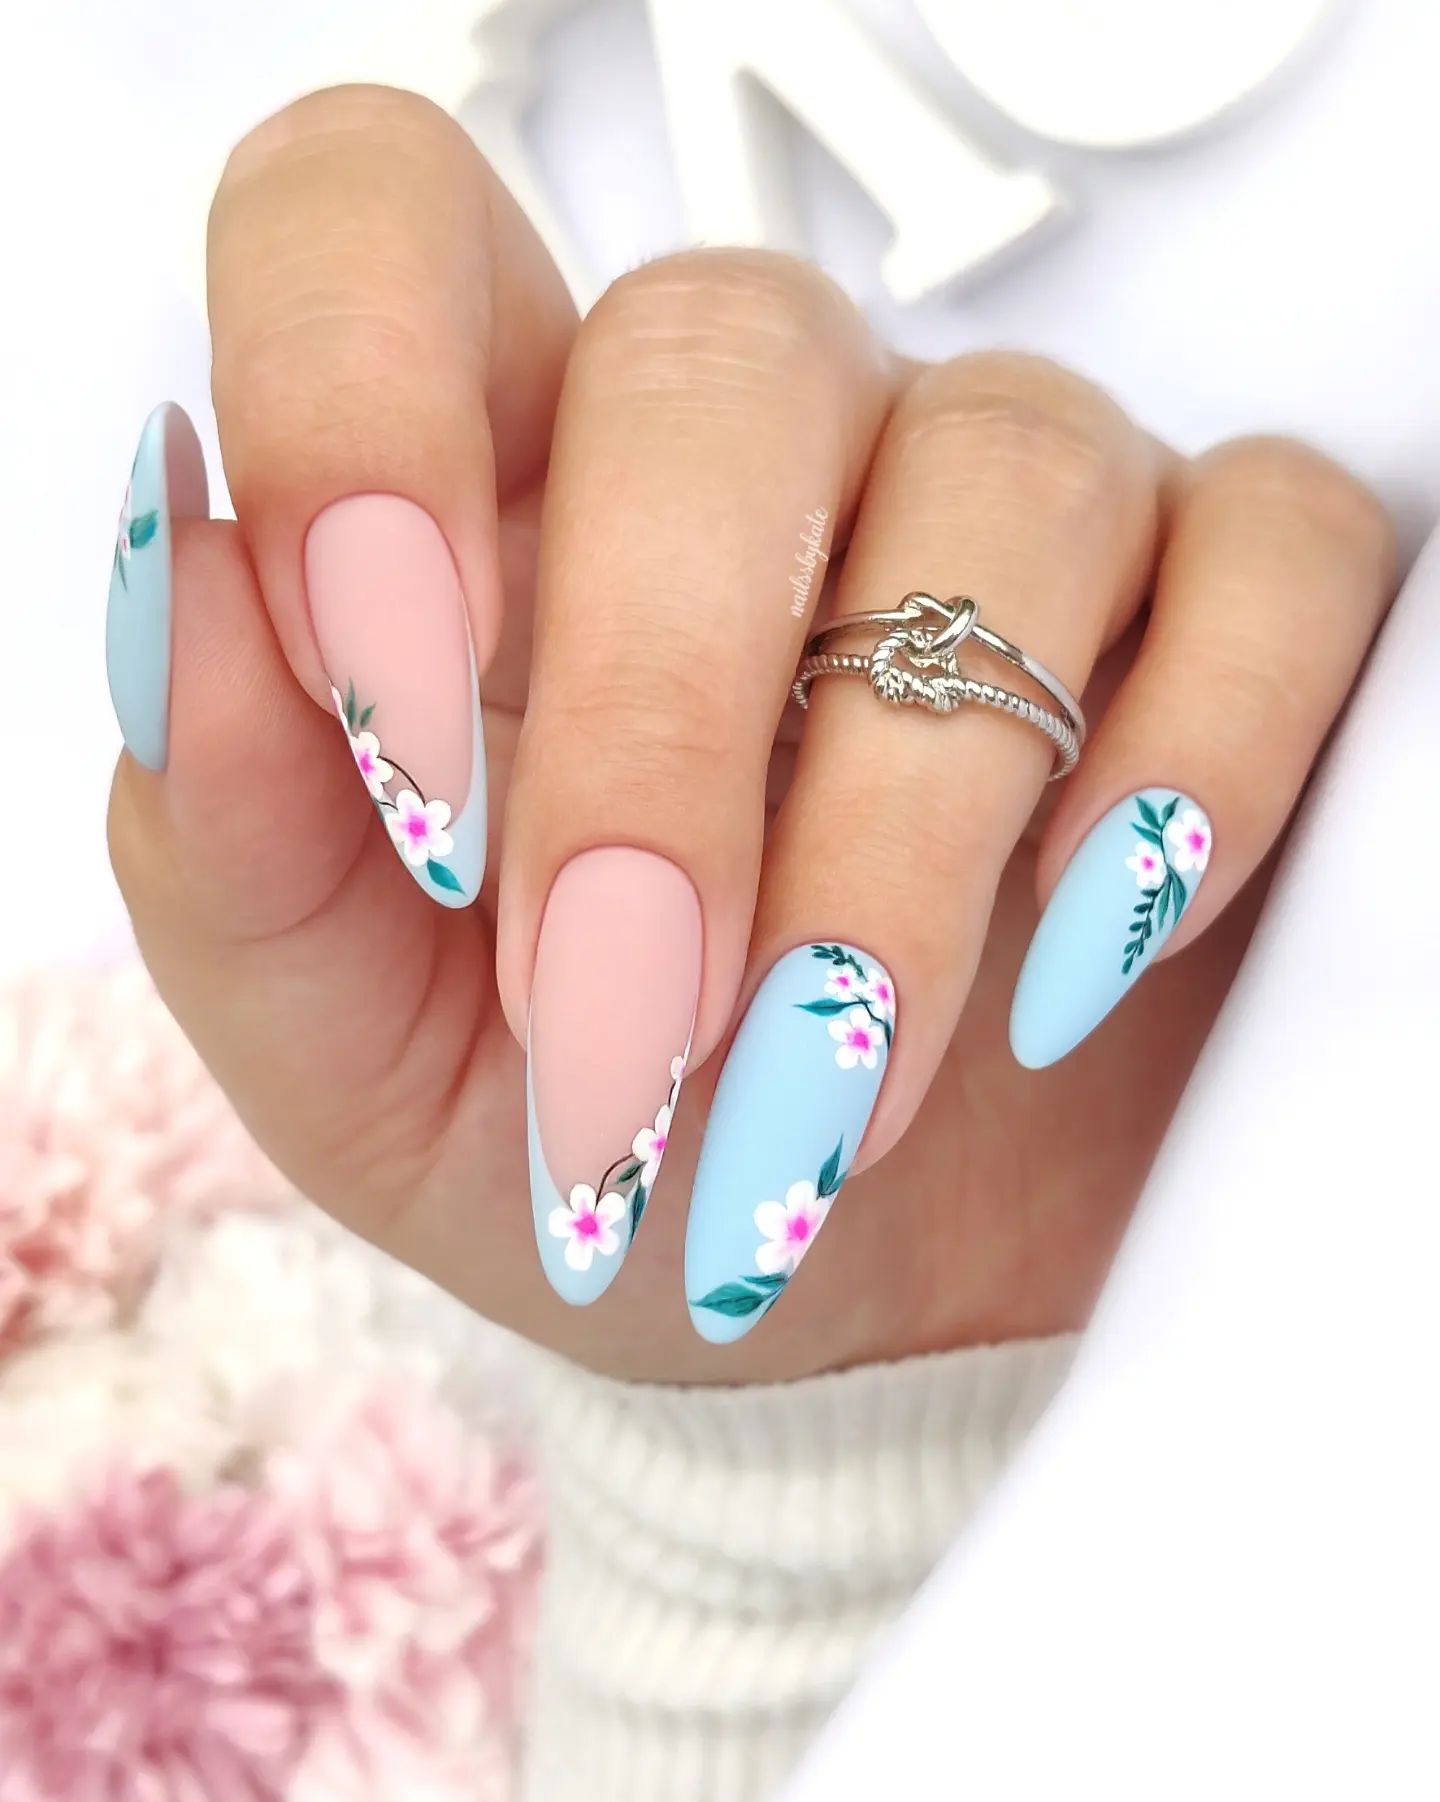 Matte Baby Blue French Tip Nails with Sakura blossom